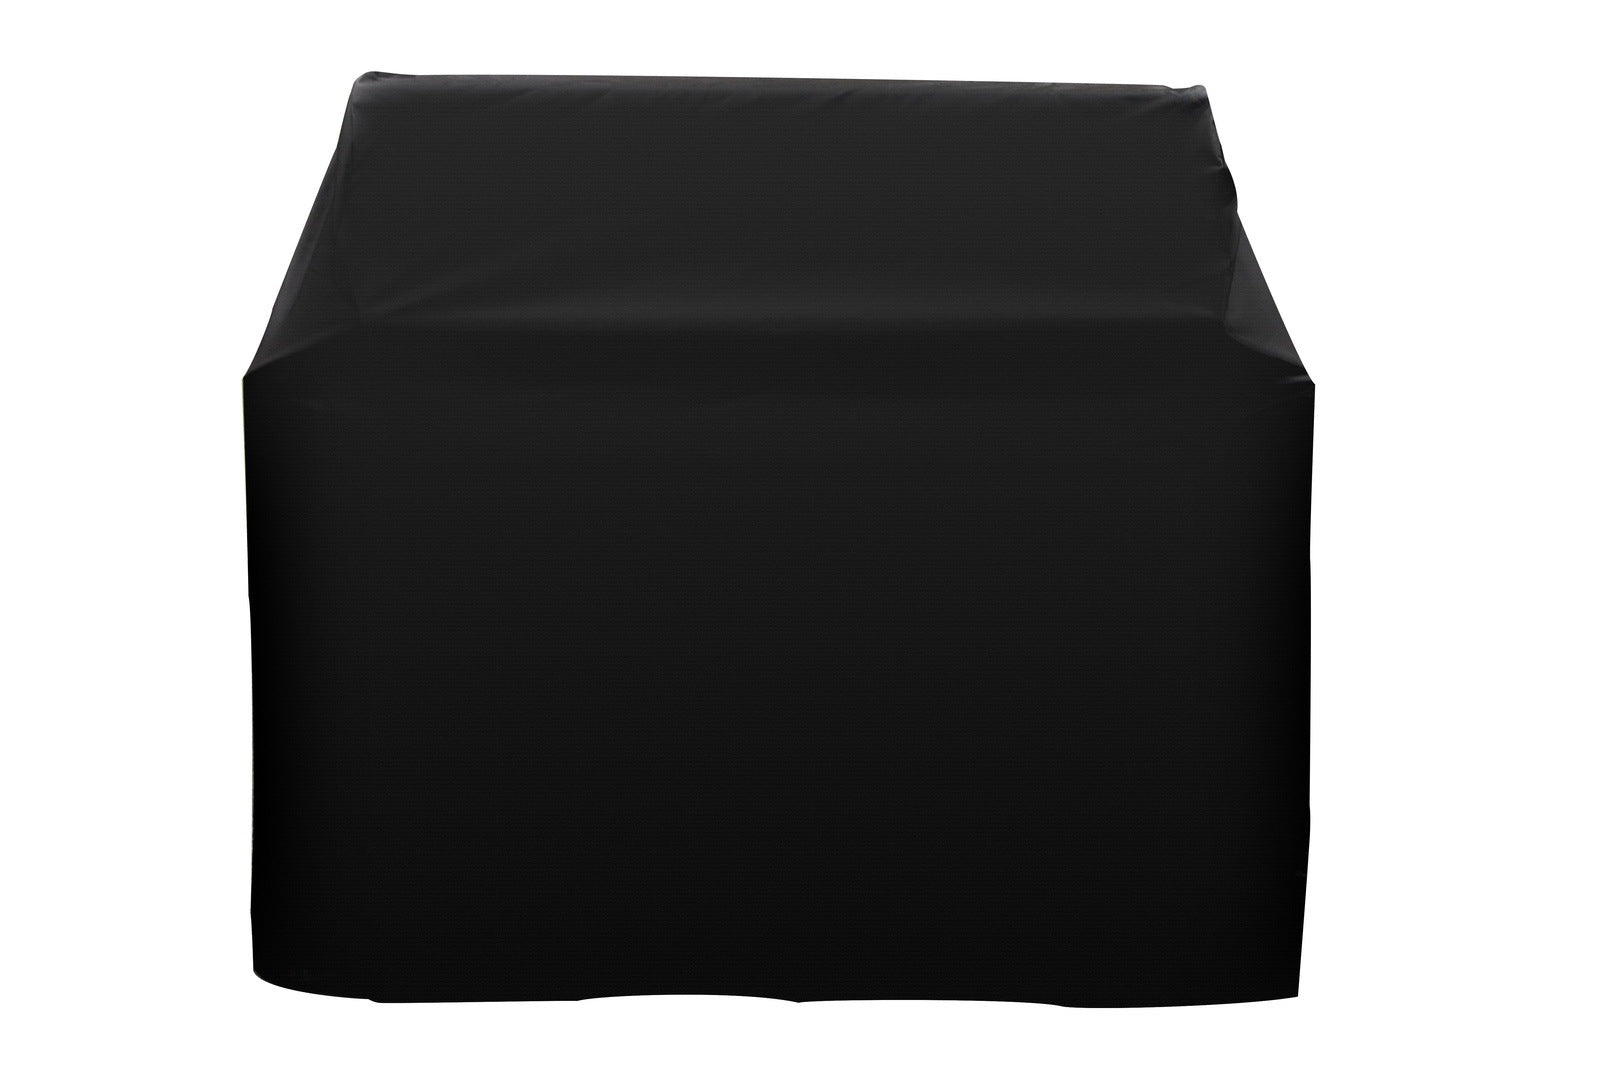 Summerset 26 Inch Freestanding Deluxe Grill Cover CARTCOV-26D